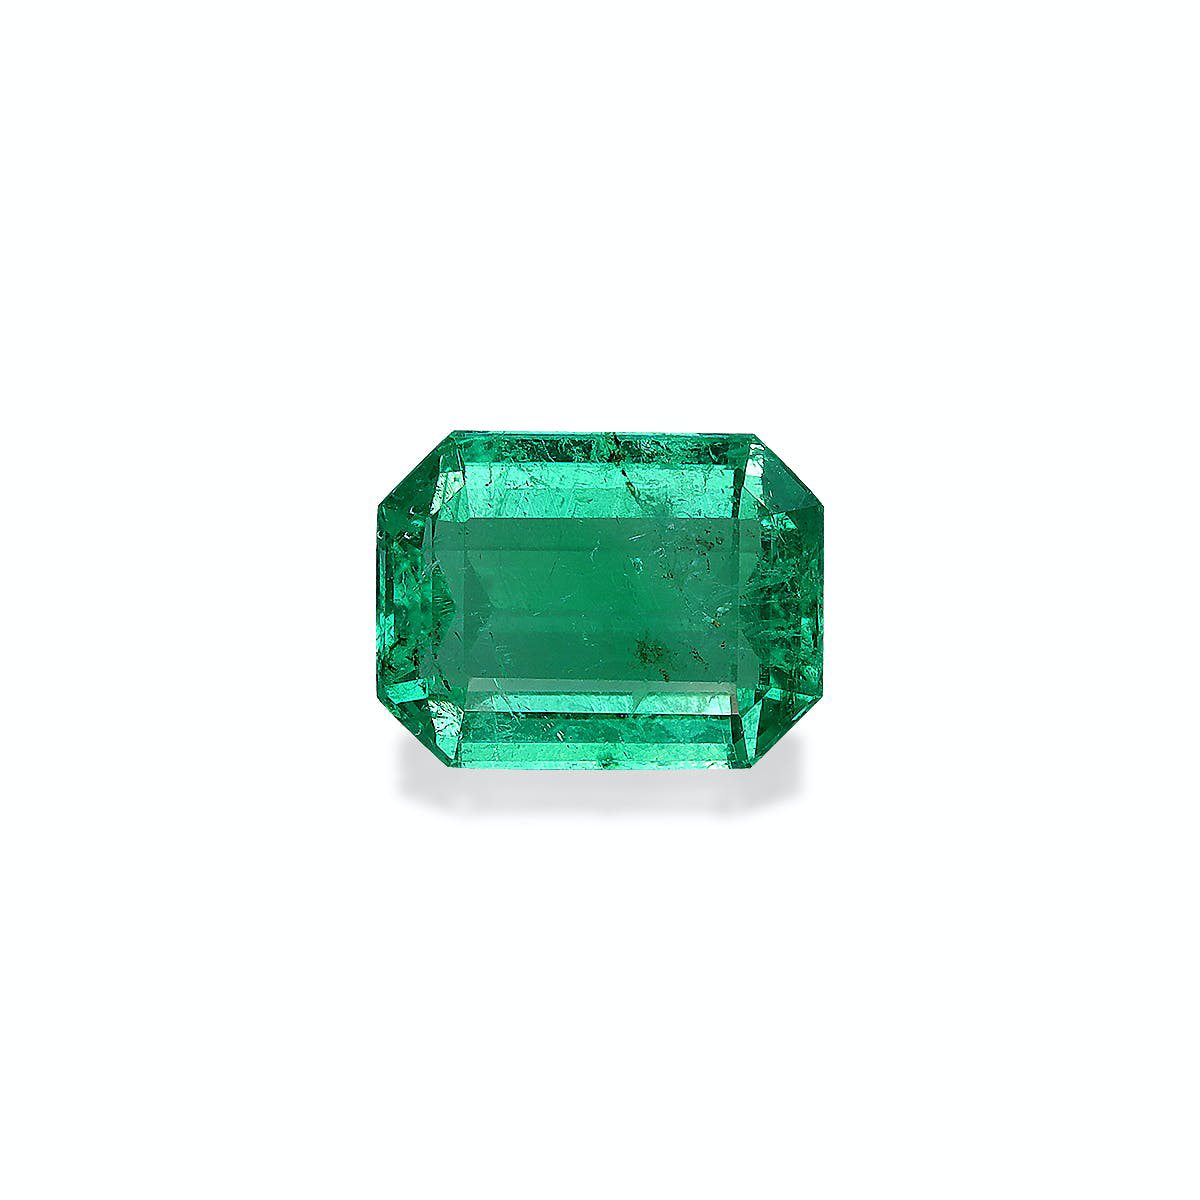 Picture of Green Zambian Emerald 1.78ct - 8x6mm (PG0348)